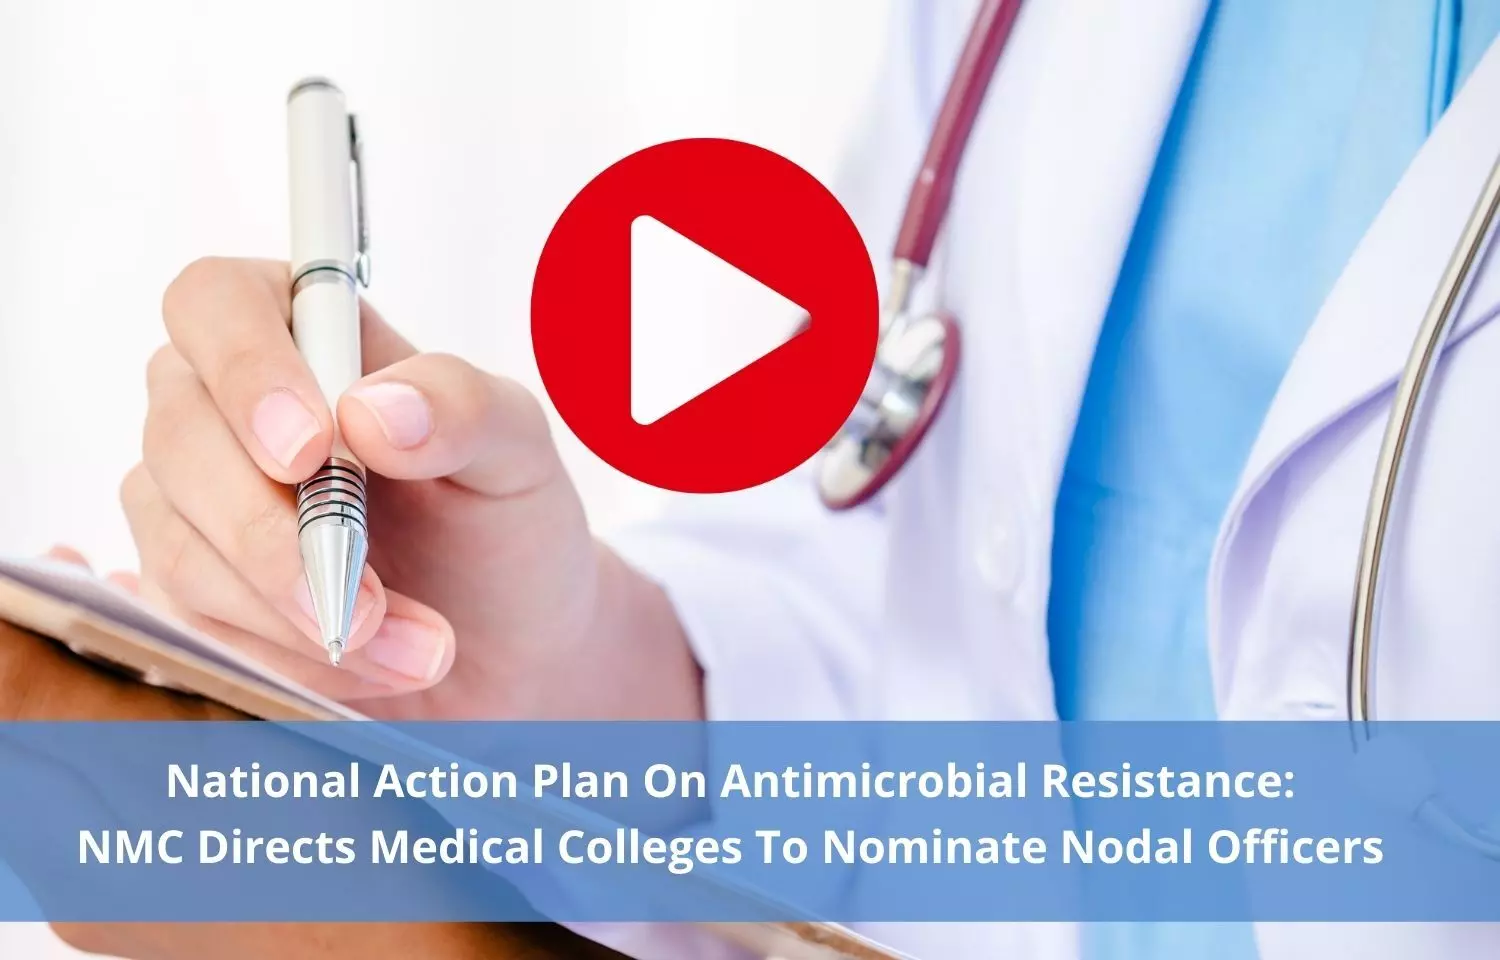 NMC asks medical colleges to nominate nodal officers for antimicrobial resistance